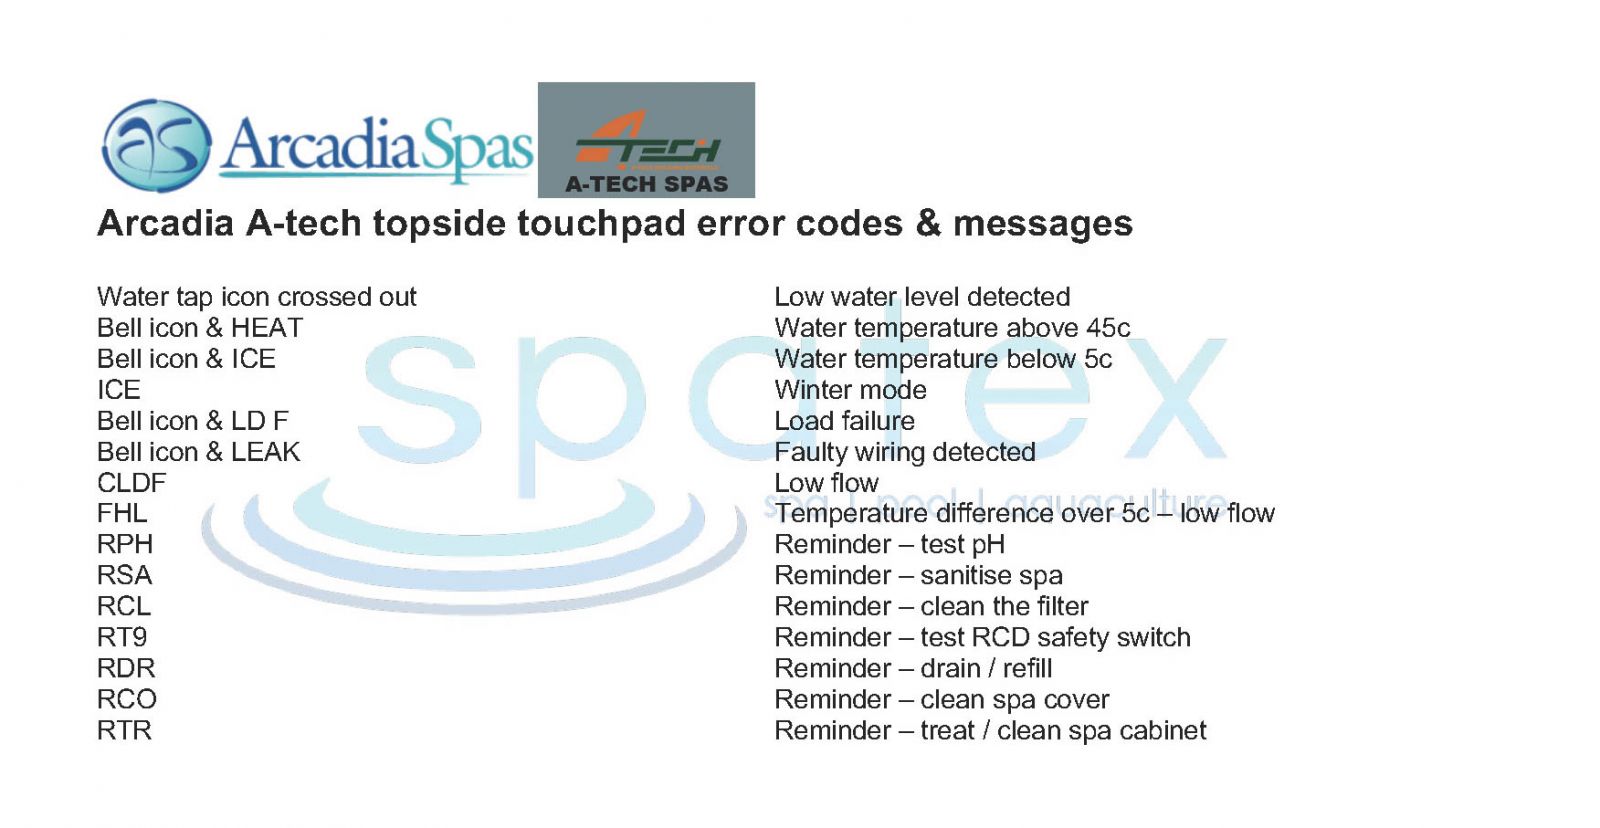 Arcadia Spas & A-Tech spa topside touchpad error codes, fault codes